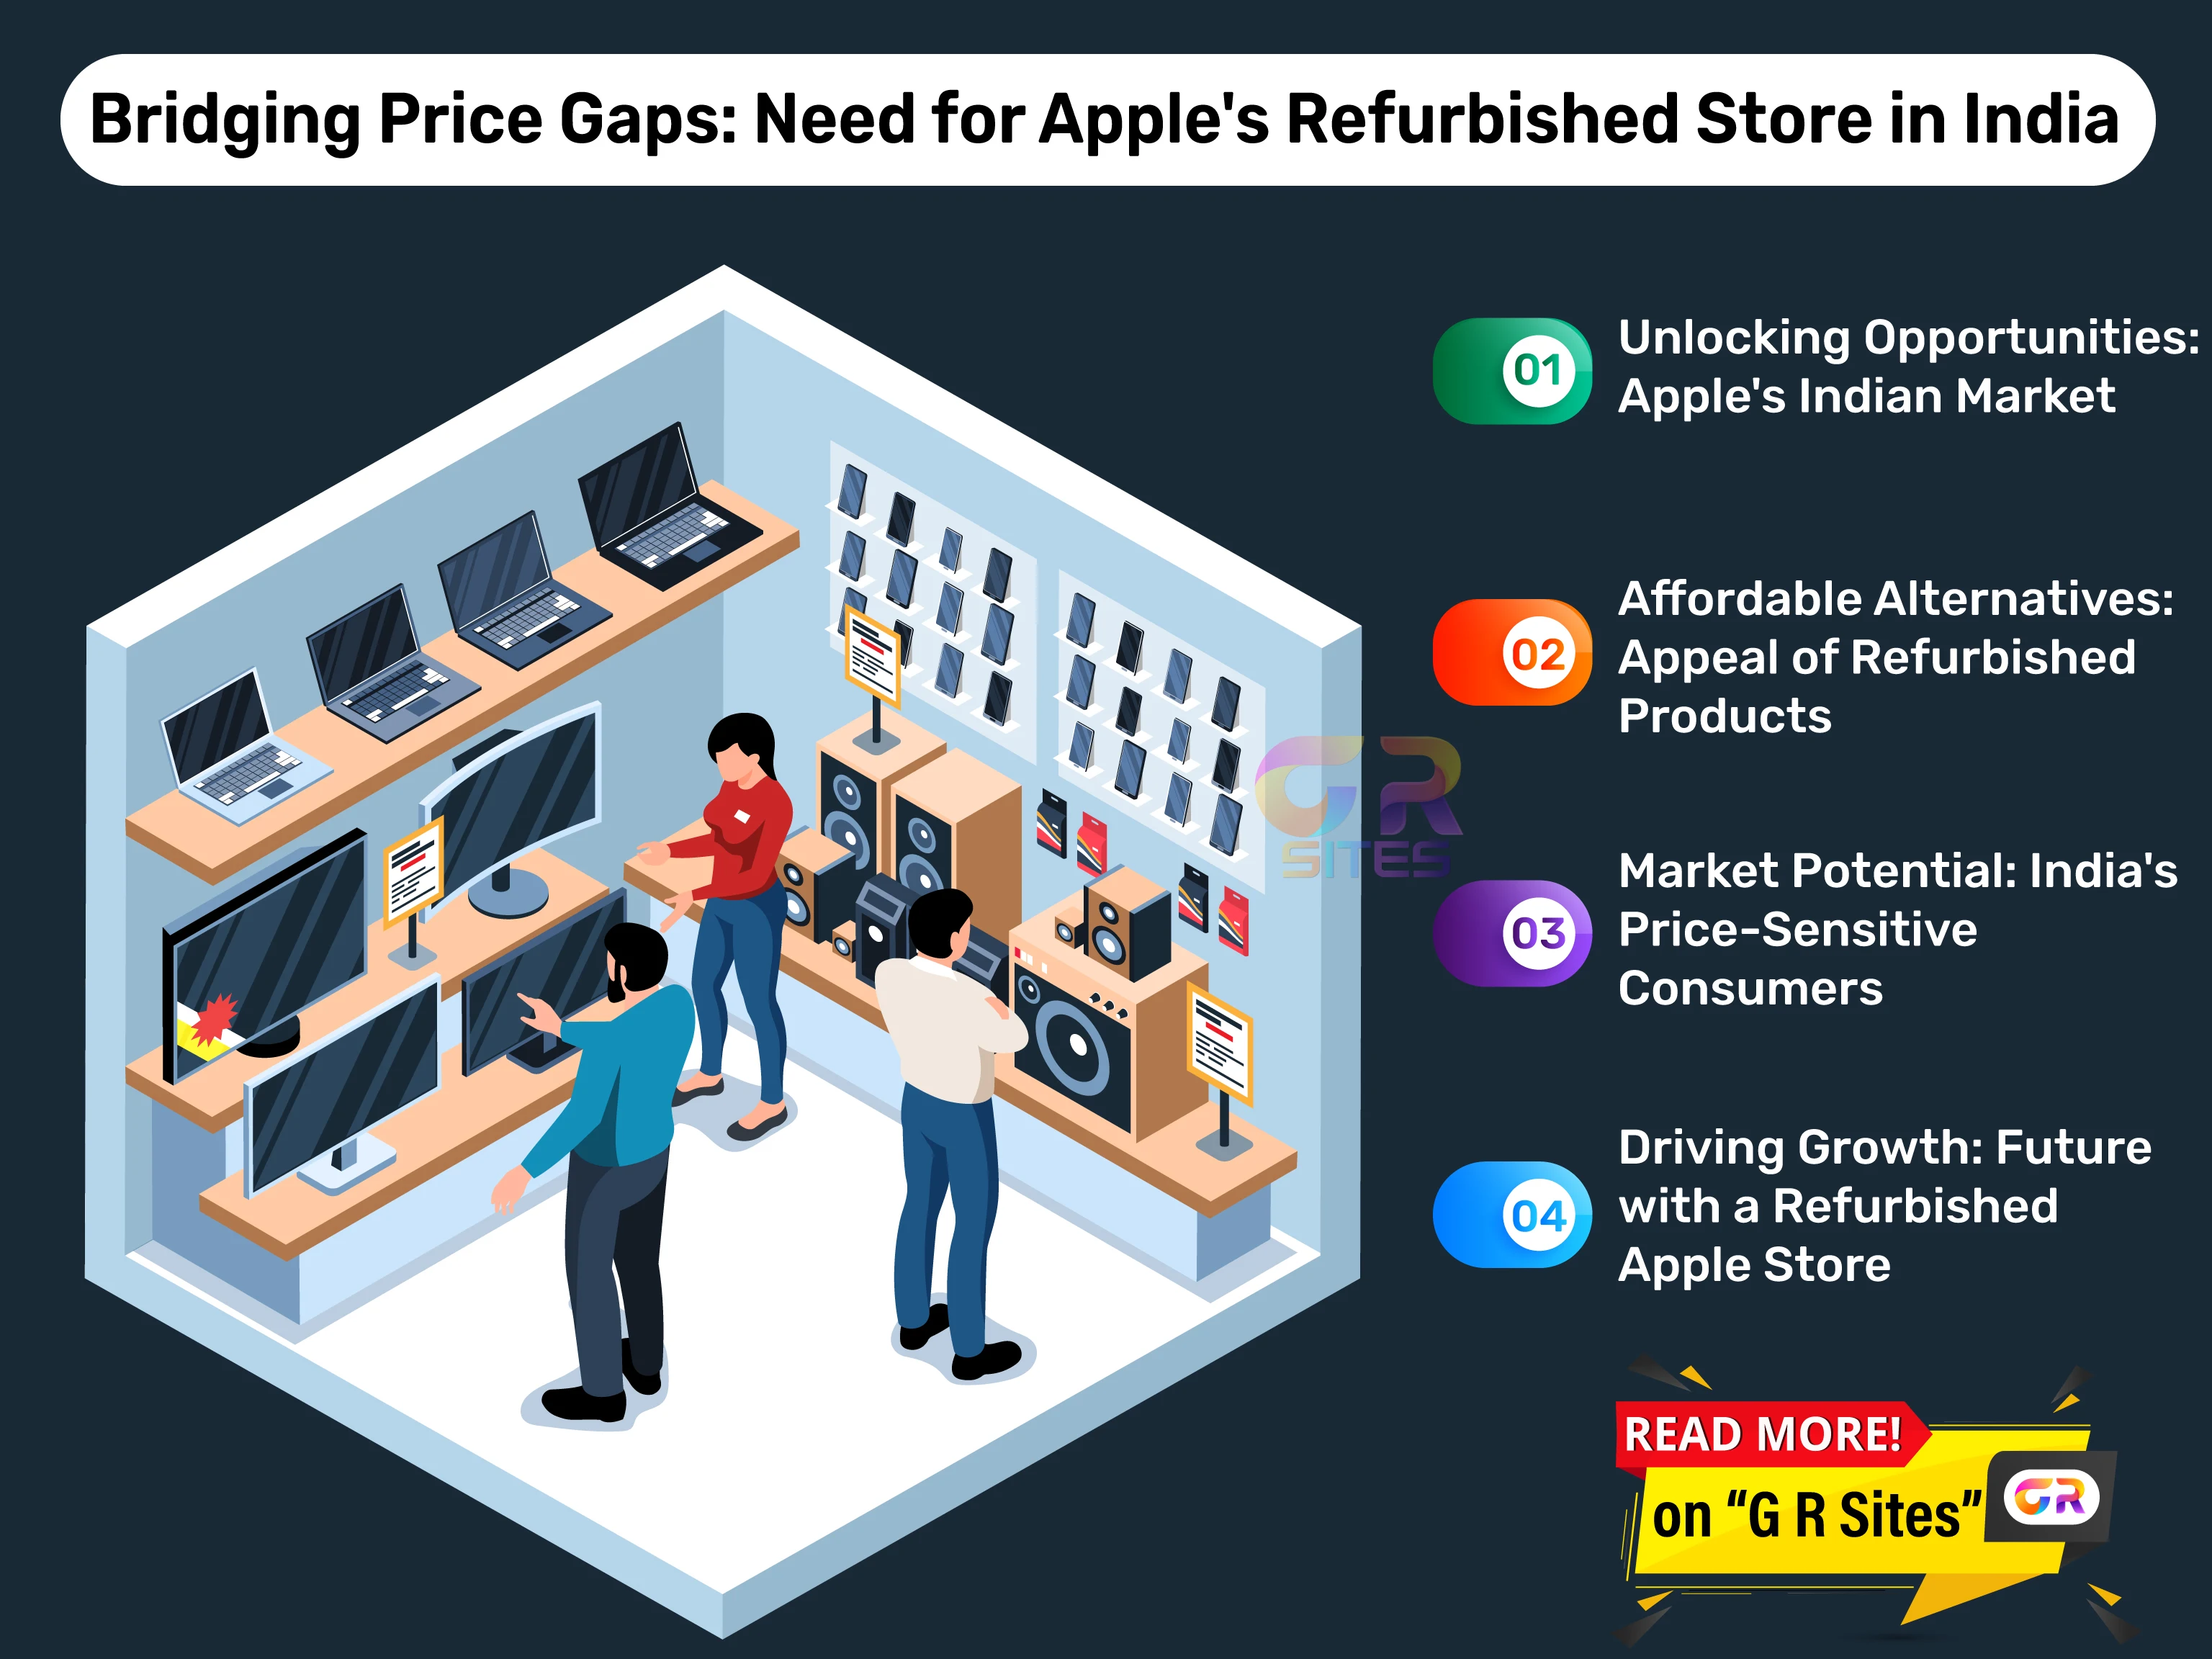 Unlocking Value: The need for Apple's Refurbished Store in India